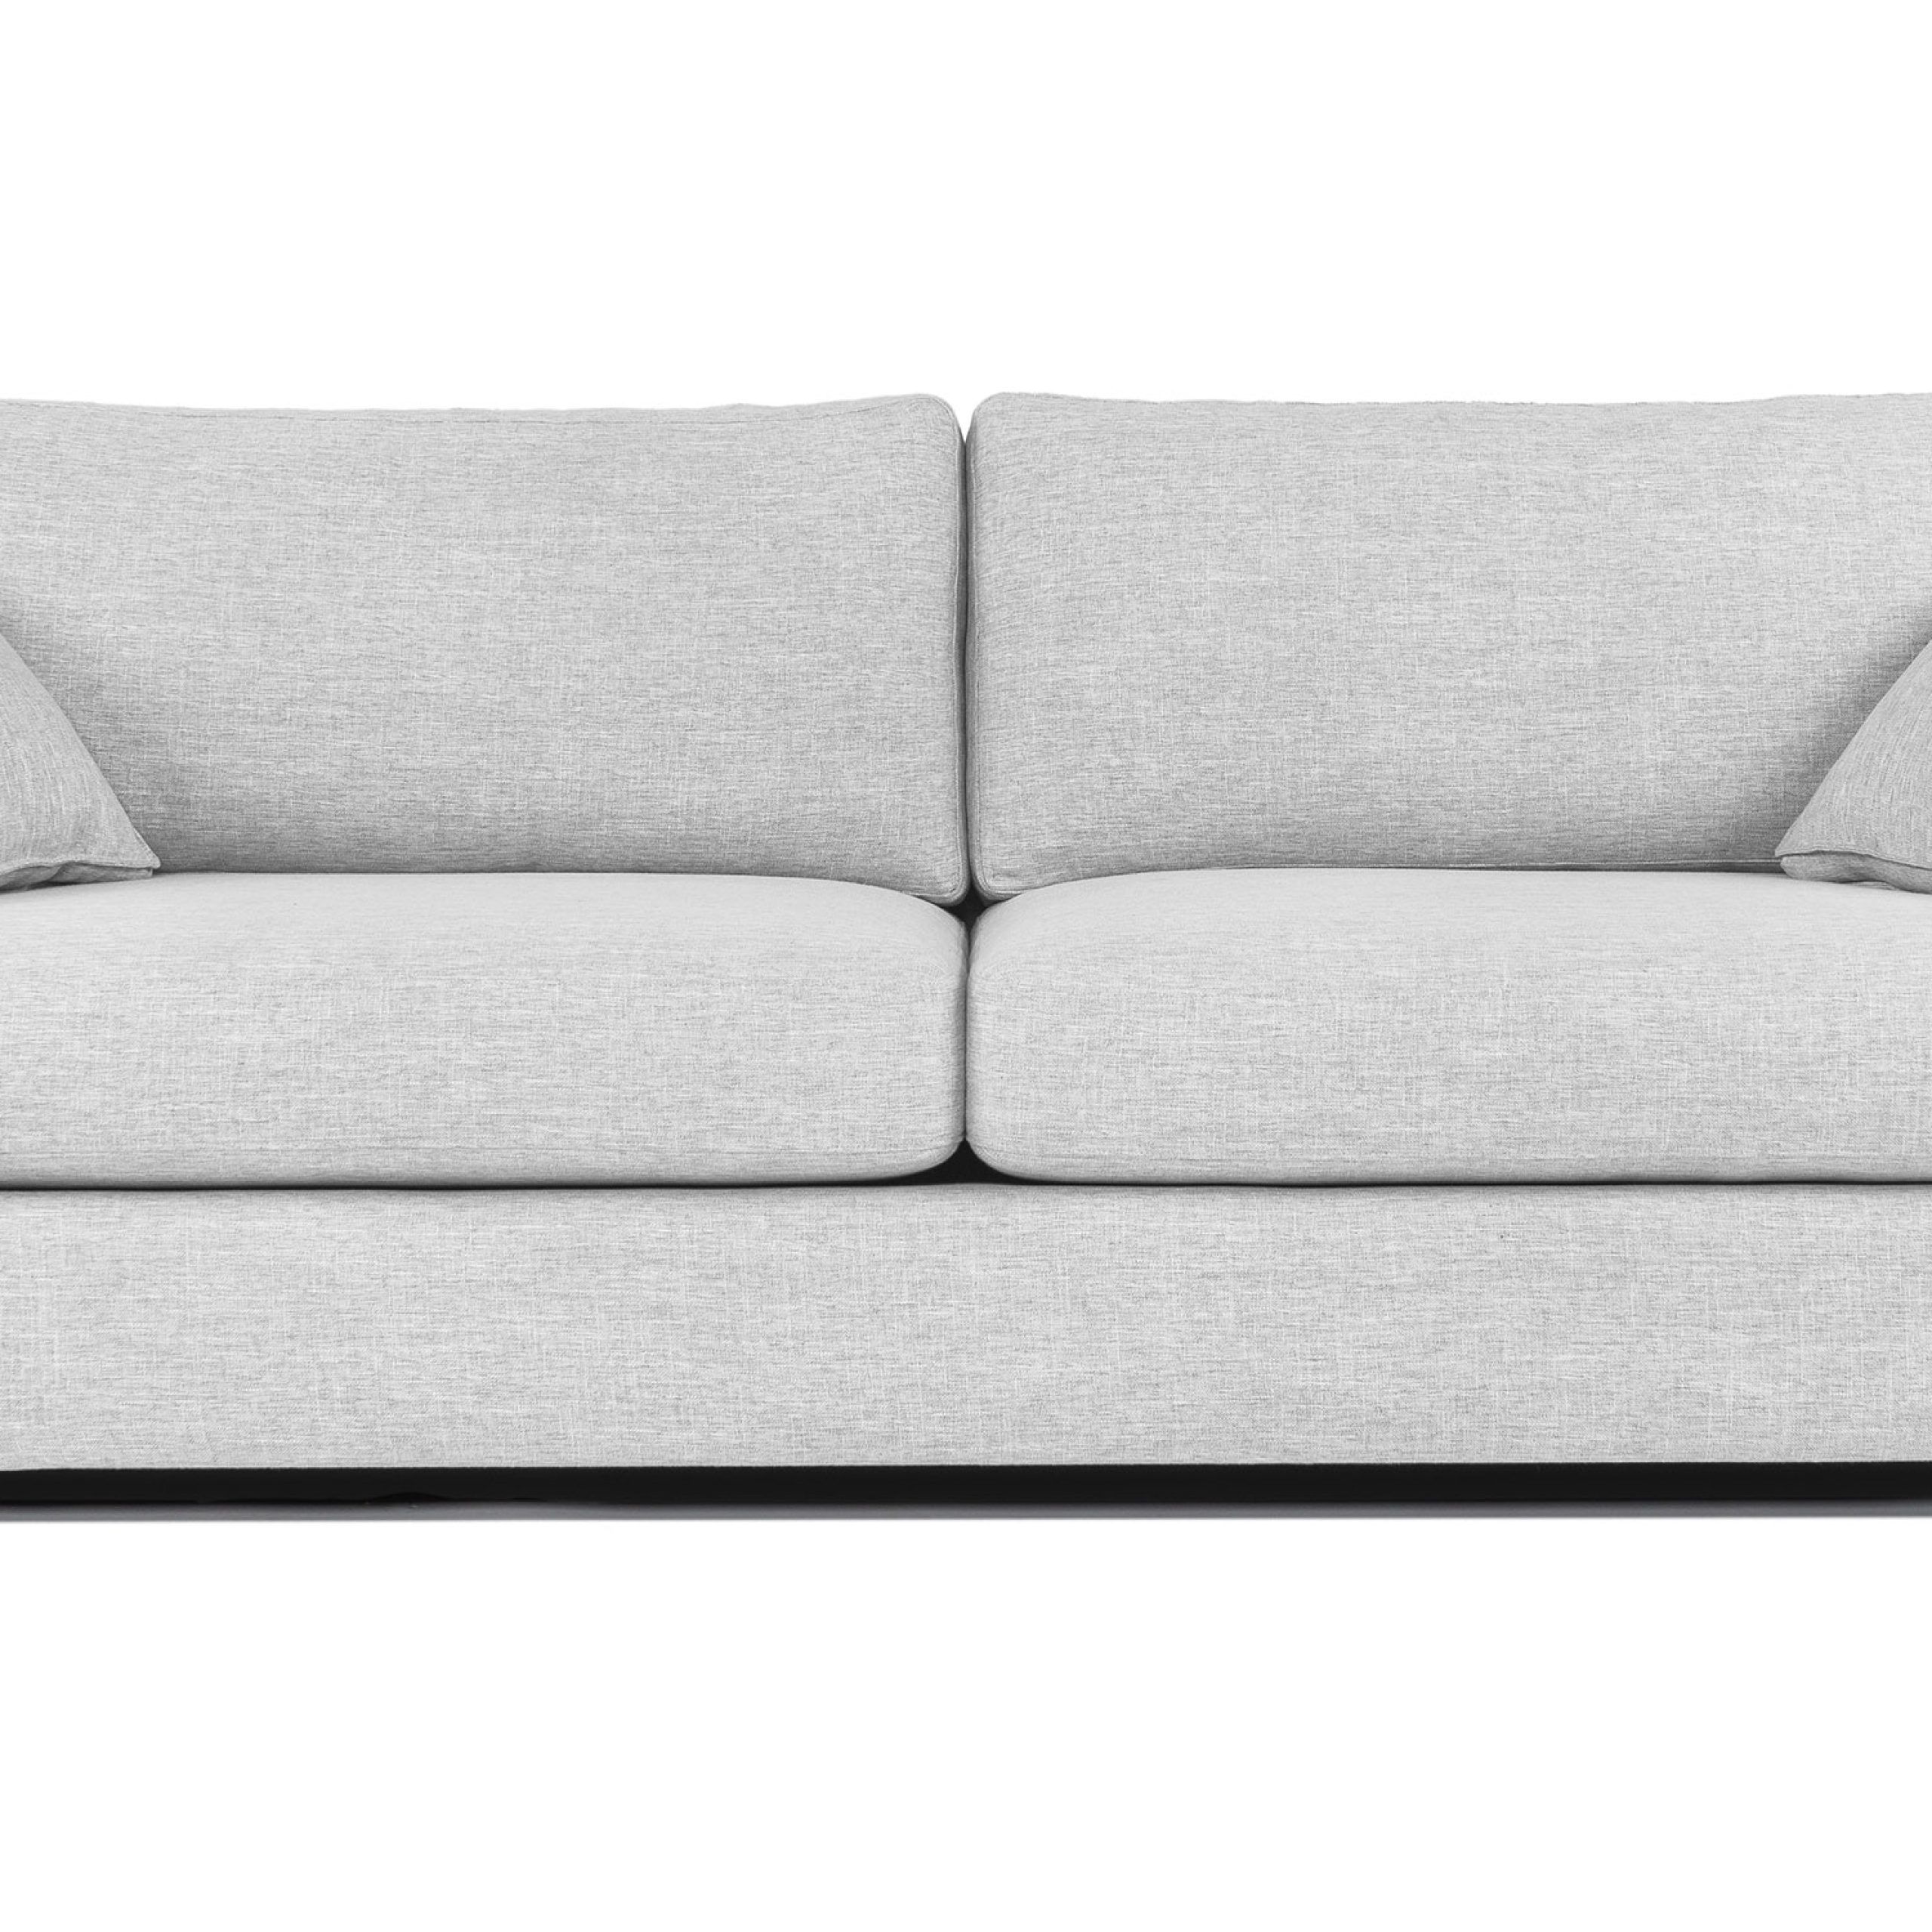 Mist Gray 3 Seater Fabric Sofa W/ Throw Pillows | Sitka | Article Throughout Modern Light Grey Loveseat Sofas (View 10 of 15)